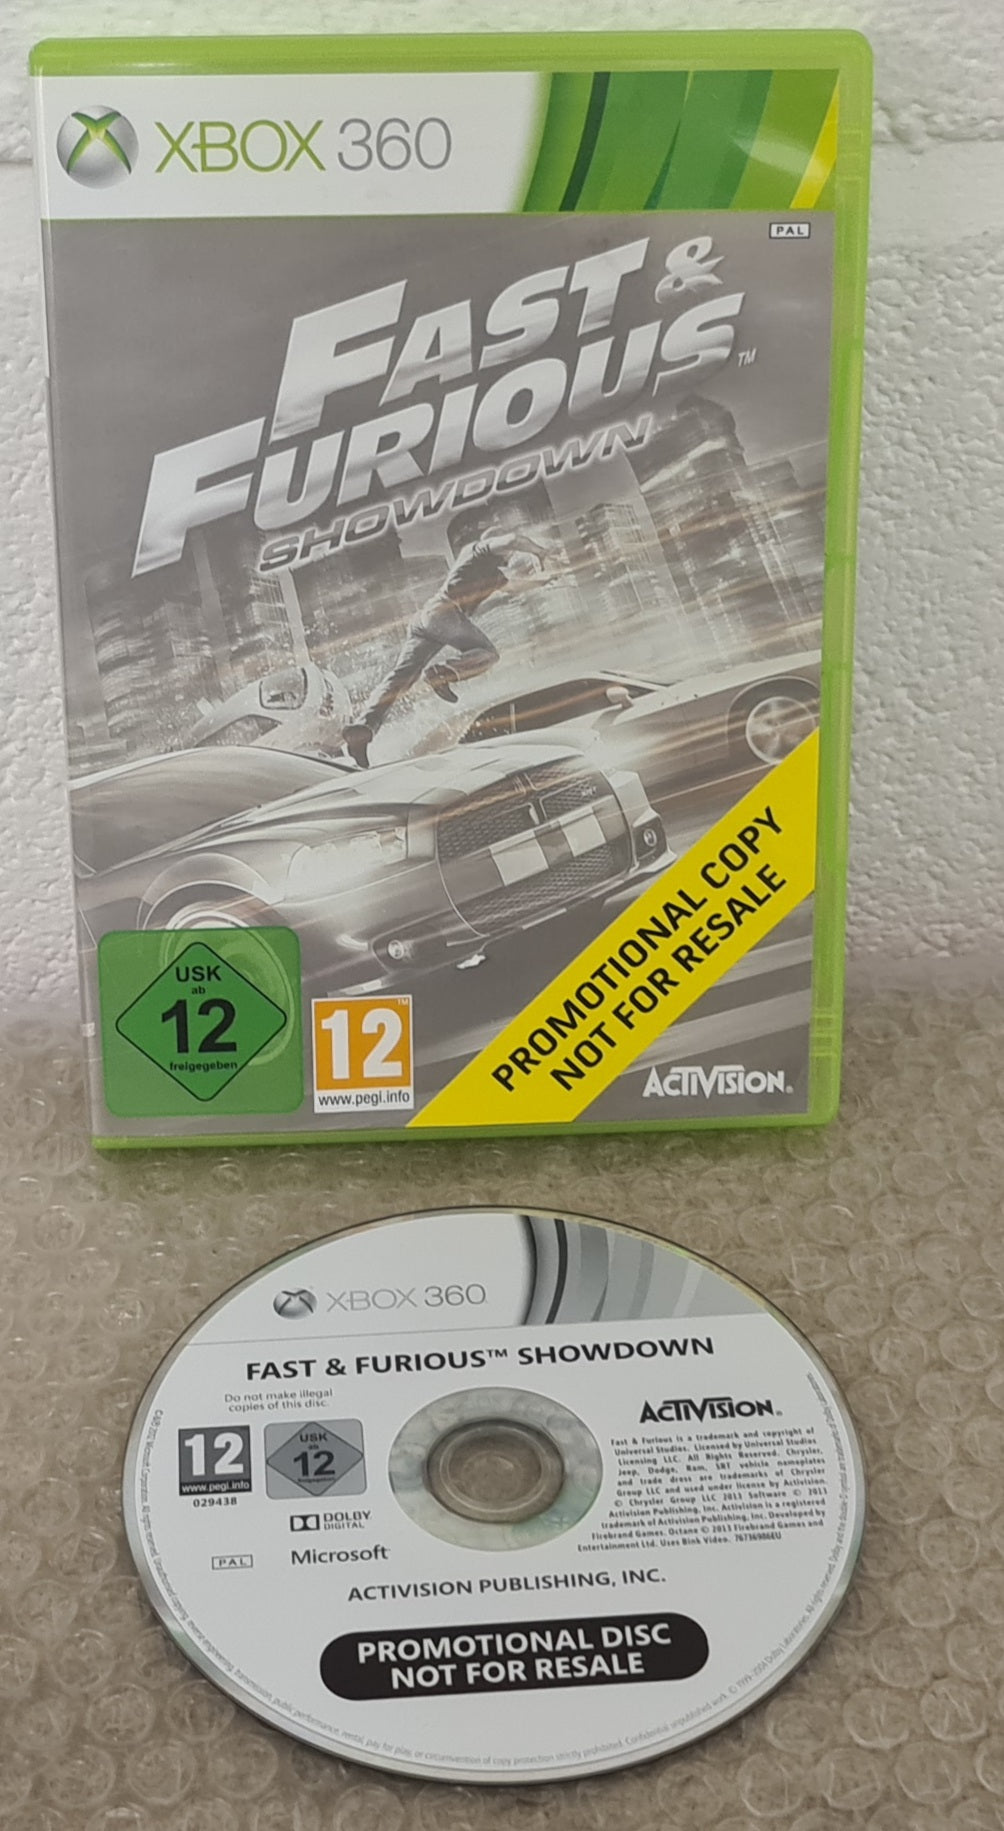 Fast & Furious Showdown RARE Promotional Copy Not for Resale Microsoft Xbox 360 Game